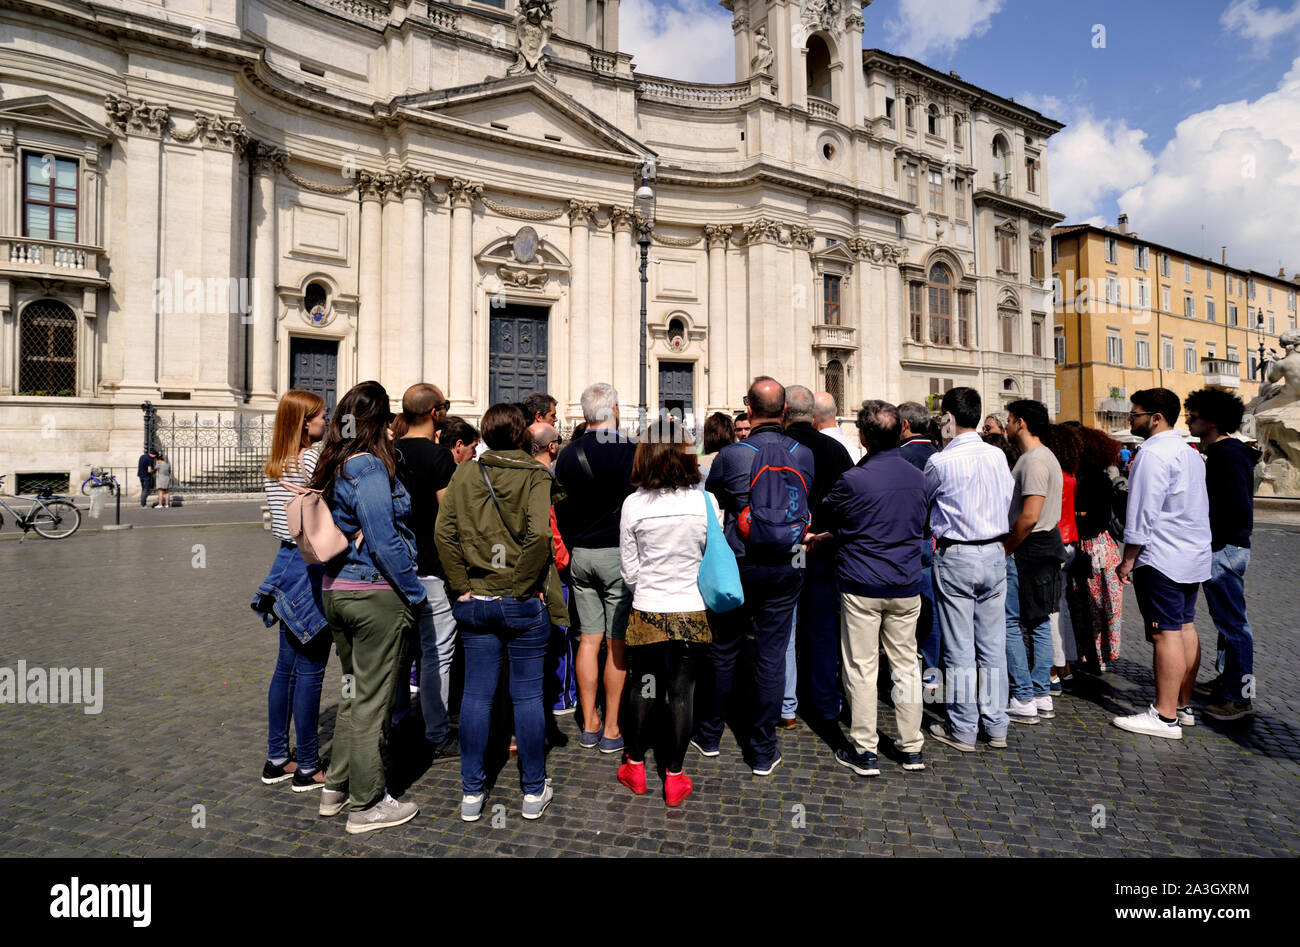 italy, rome, piazza navona, church of sant'agnese in agone and tourist group Stock Photo